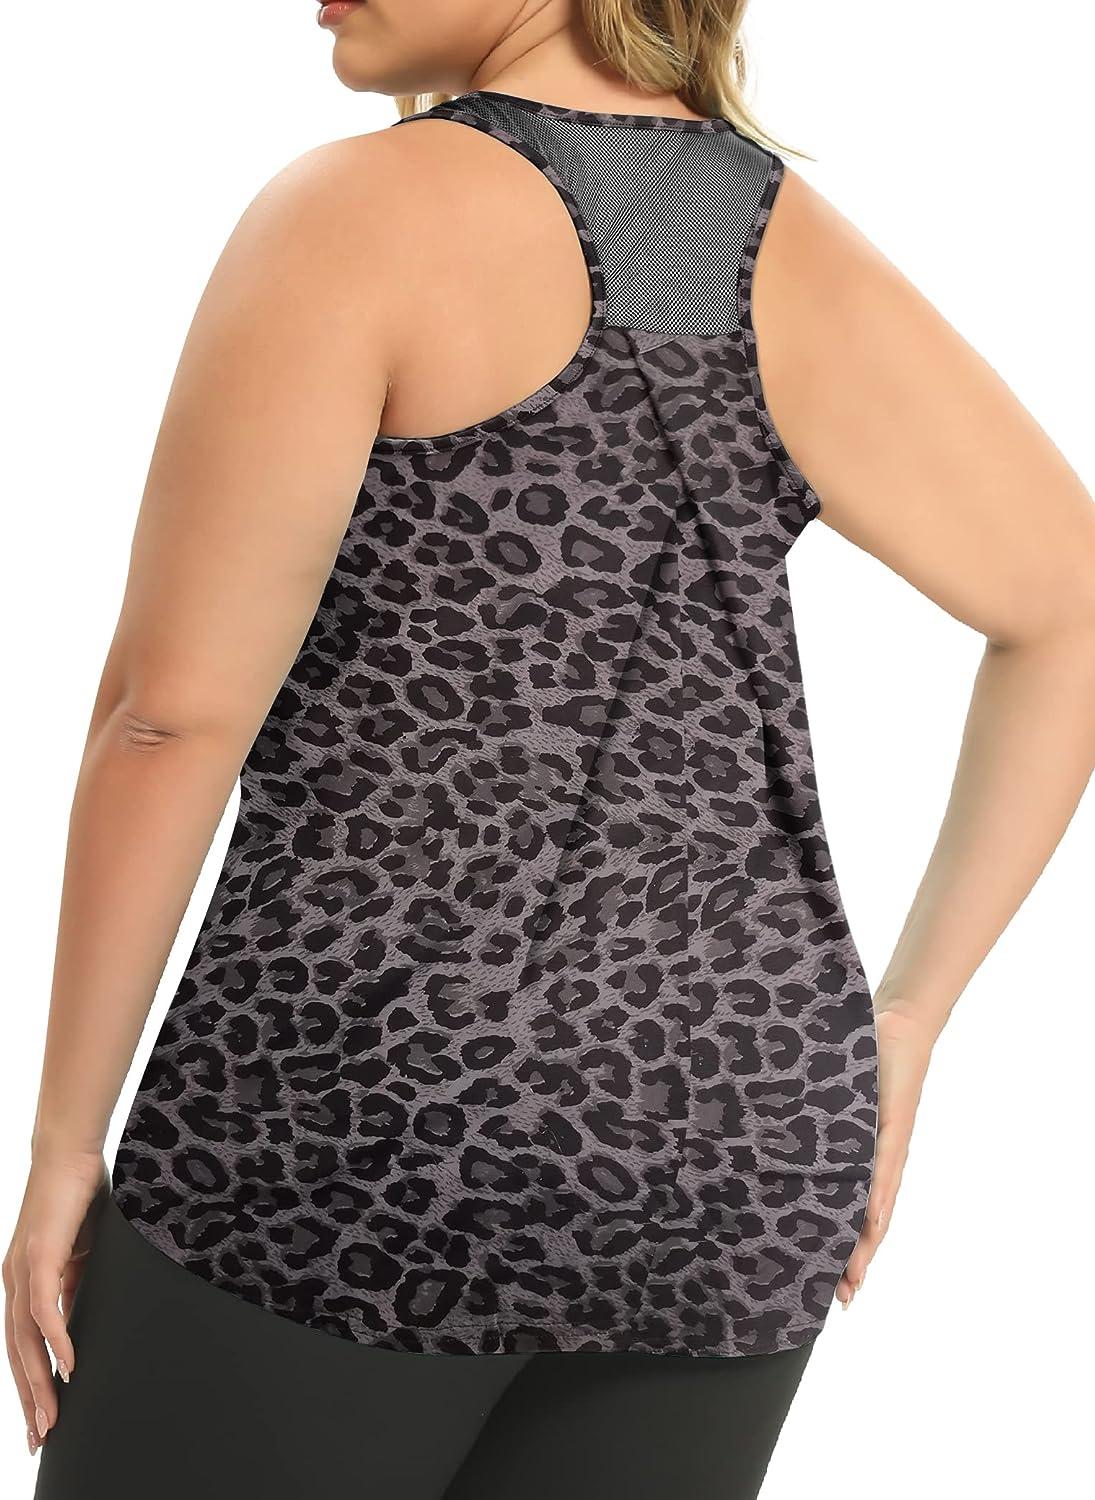 Women's Plus Size Workout Tank Tops Racerback Loose Fit Sport Athletic Tops  Yoga Running Summer Shirts Bb_grey Leopard 3X-Large Plus